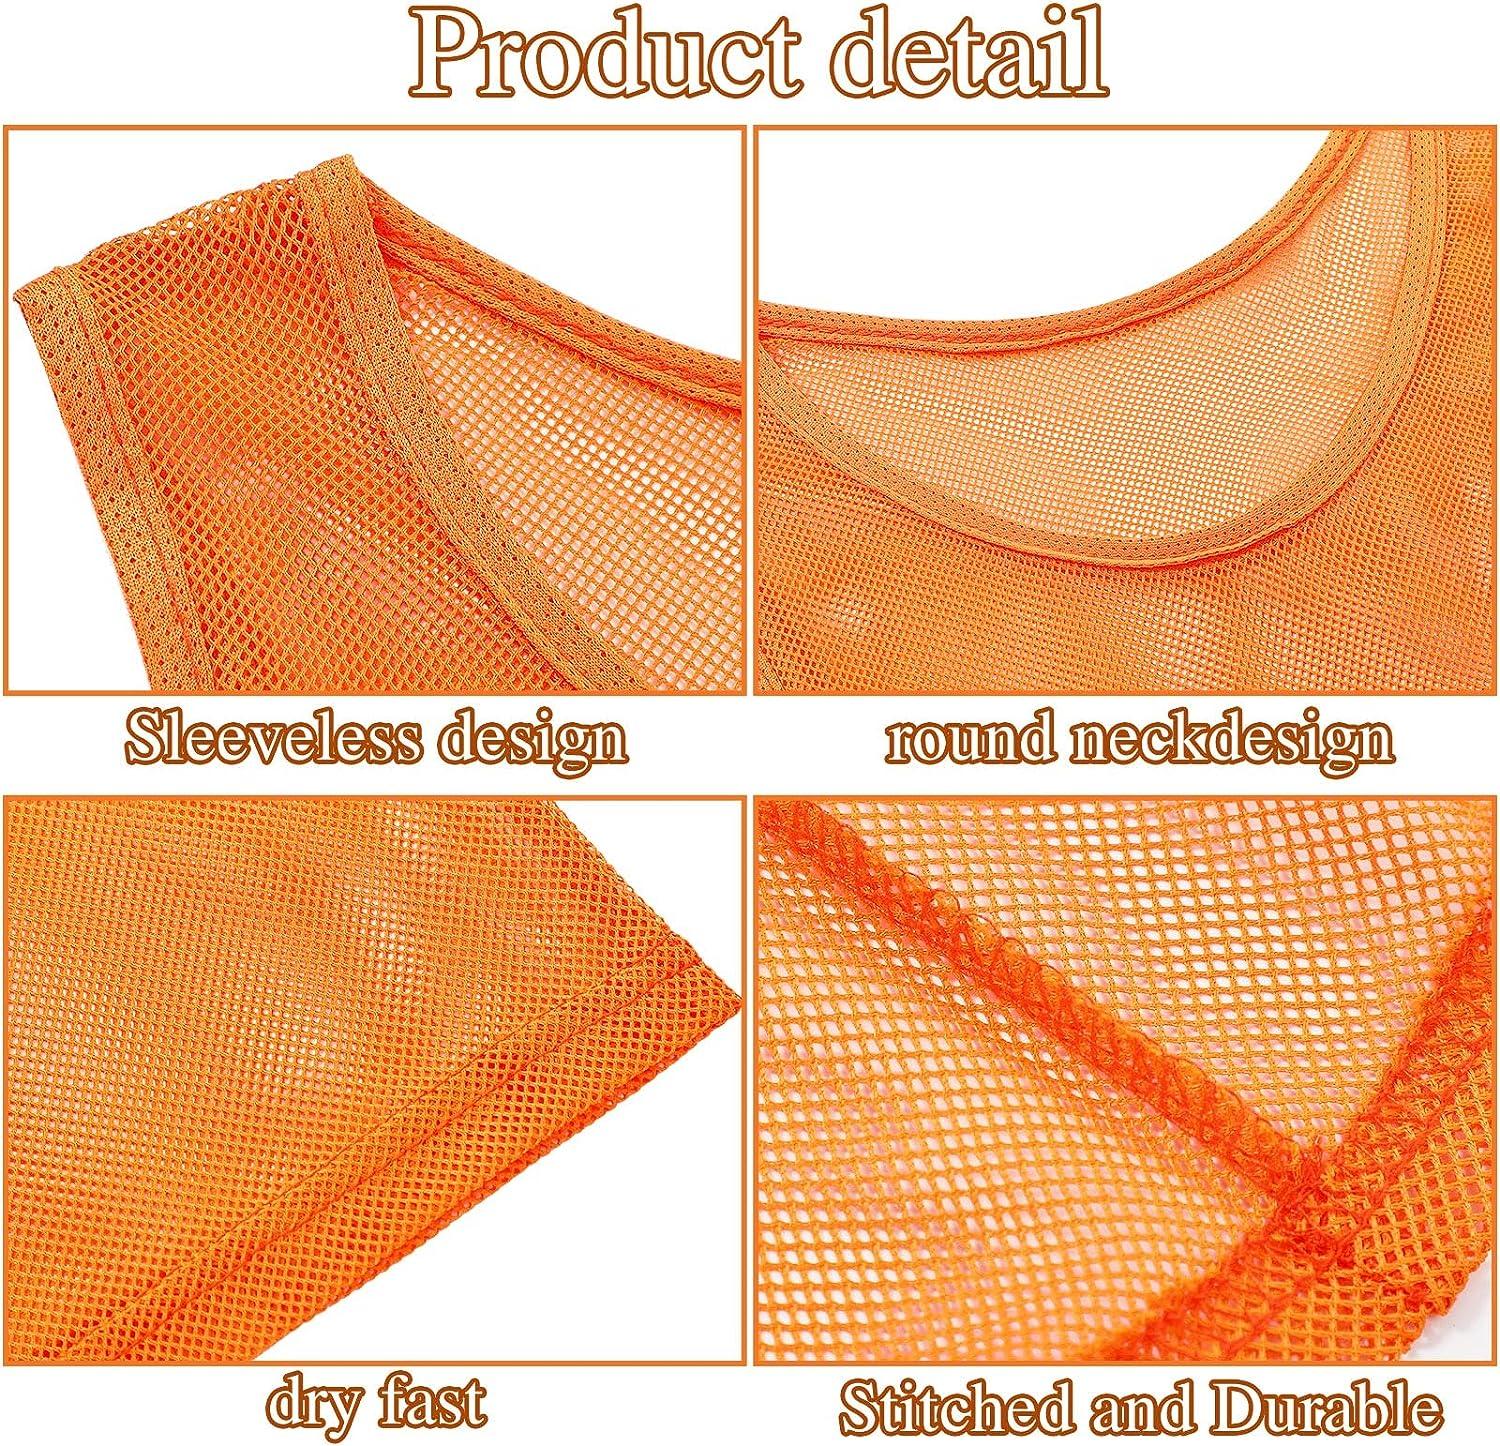 Murray Sporting Goods Mesh Training Practice Pinnies - Set of 12 Adult / 12 Orange with Numbers